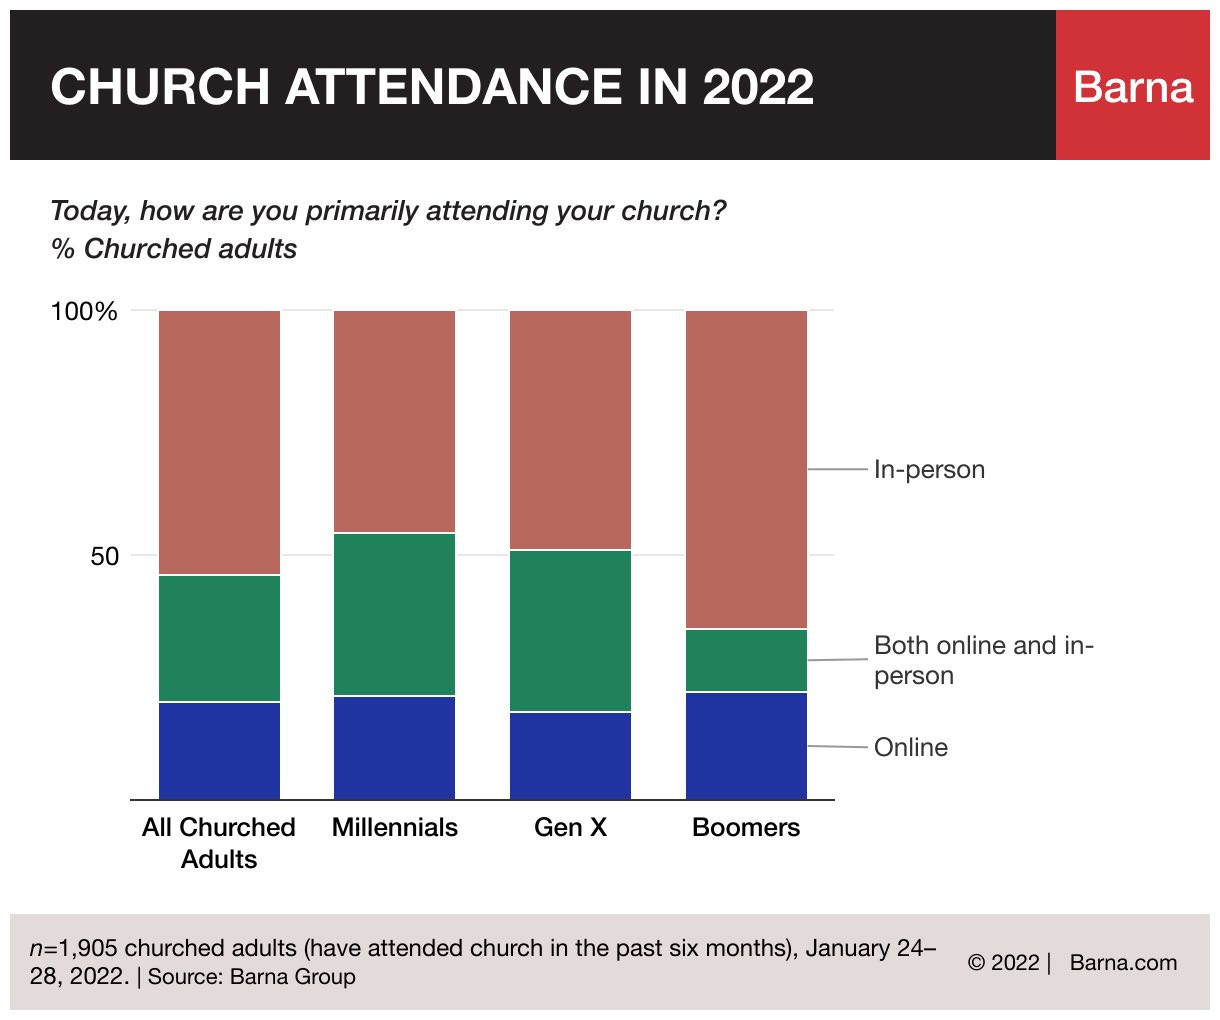 How Generations Attend Church 2022